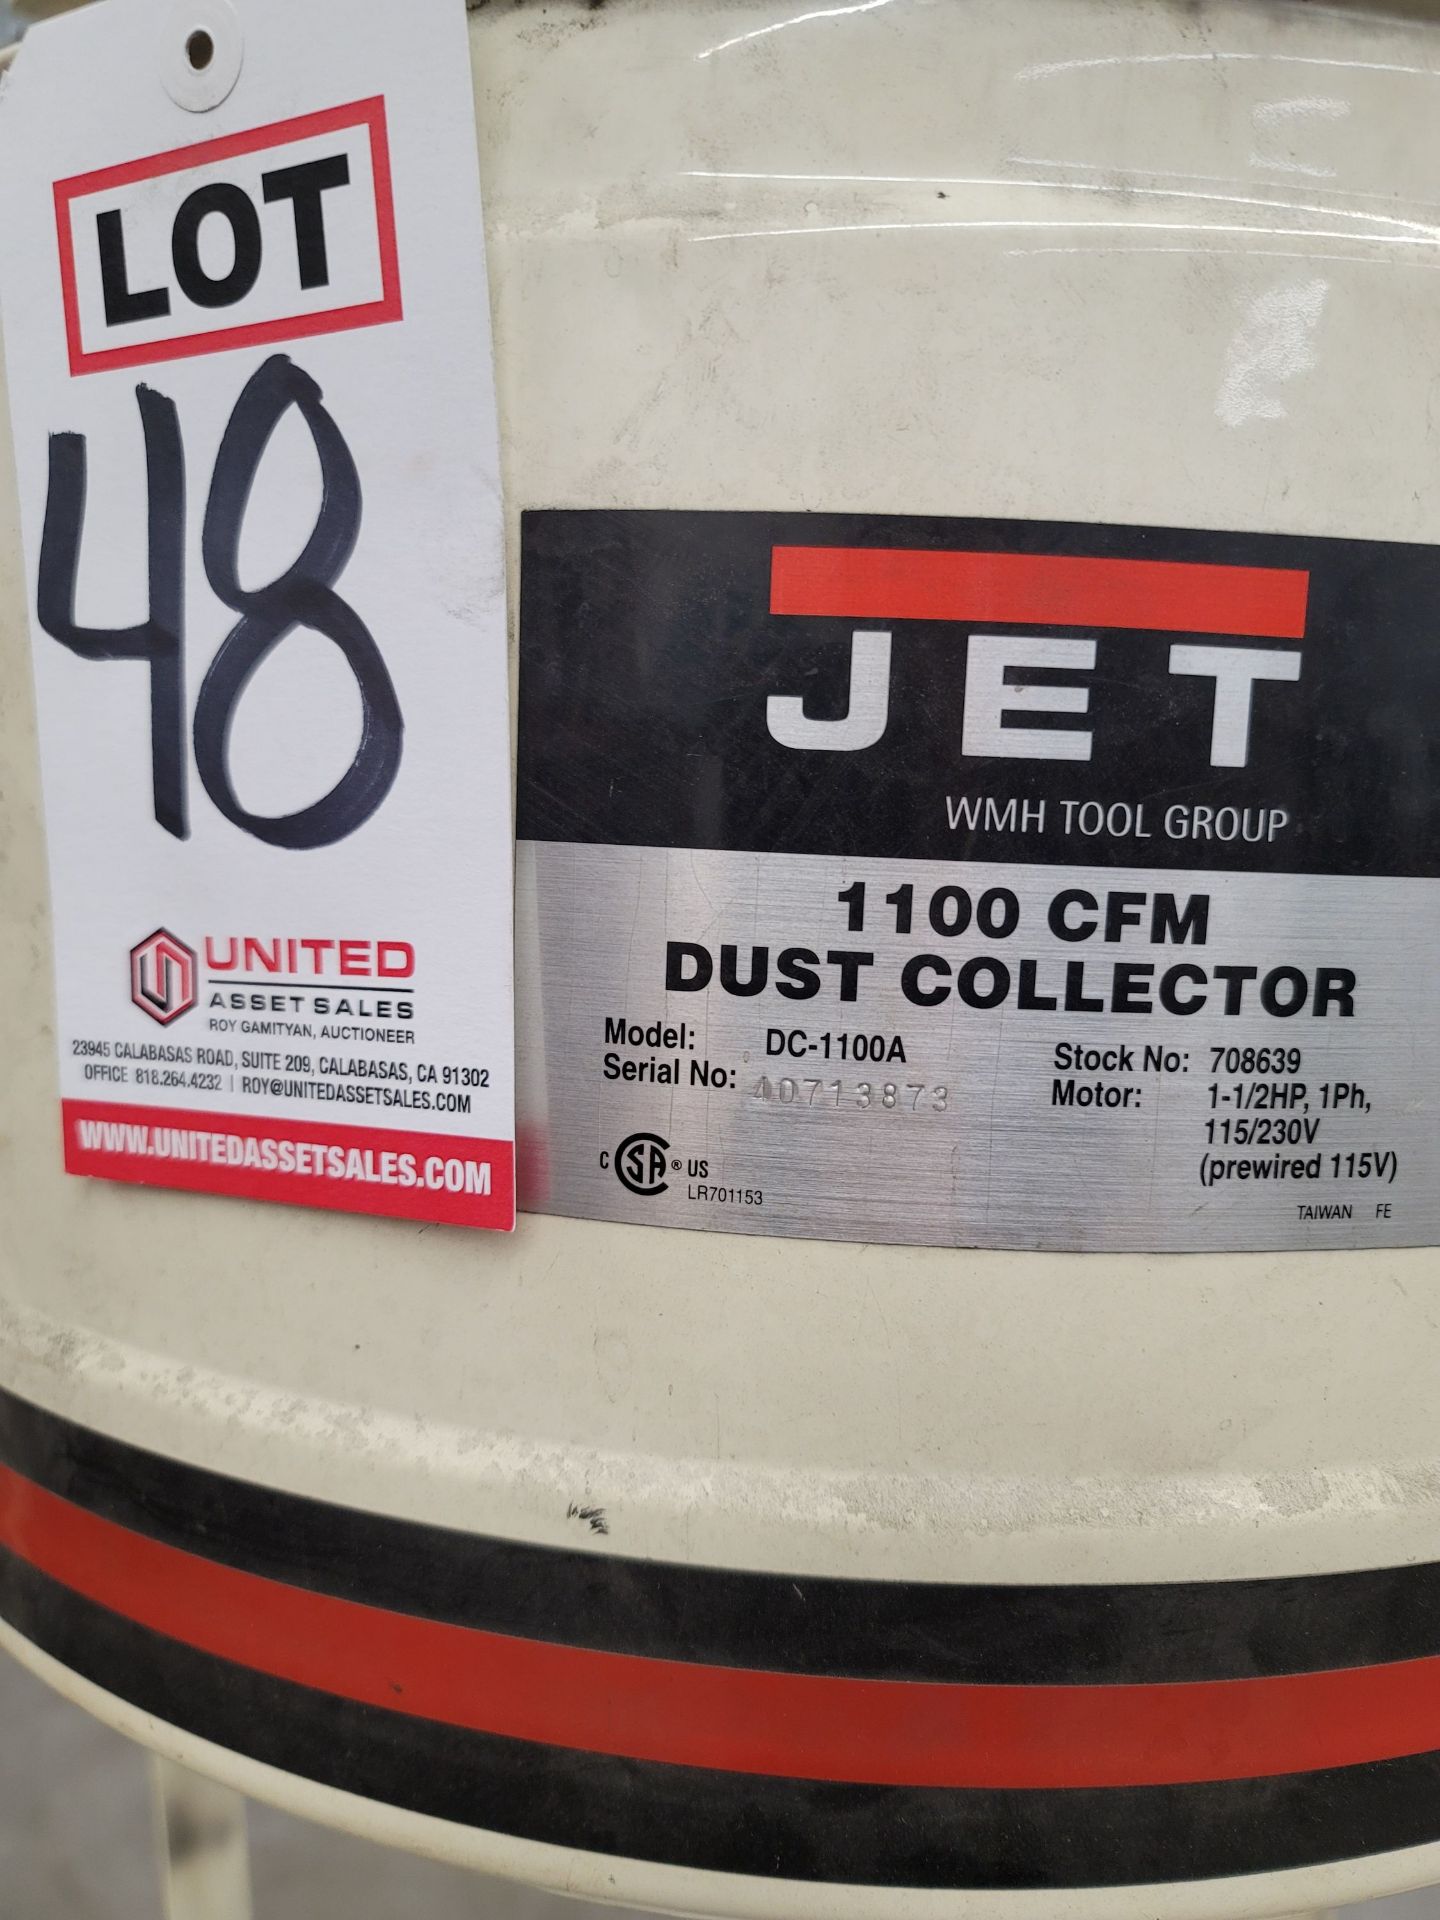 JET 1100 CFM DUST COLLECTOR, MODEL DC-1100A, 1-1/2 HP, SINGLE PHASE, S/N 40713873, MISSING THE - Image 2 of 4